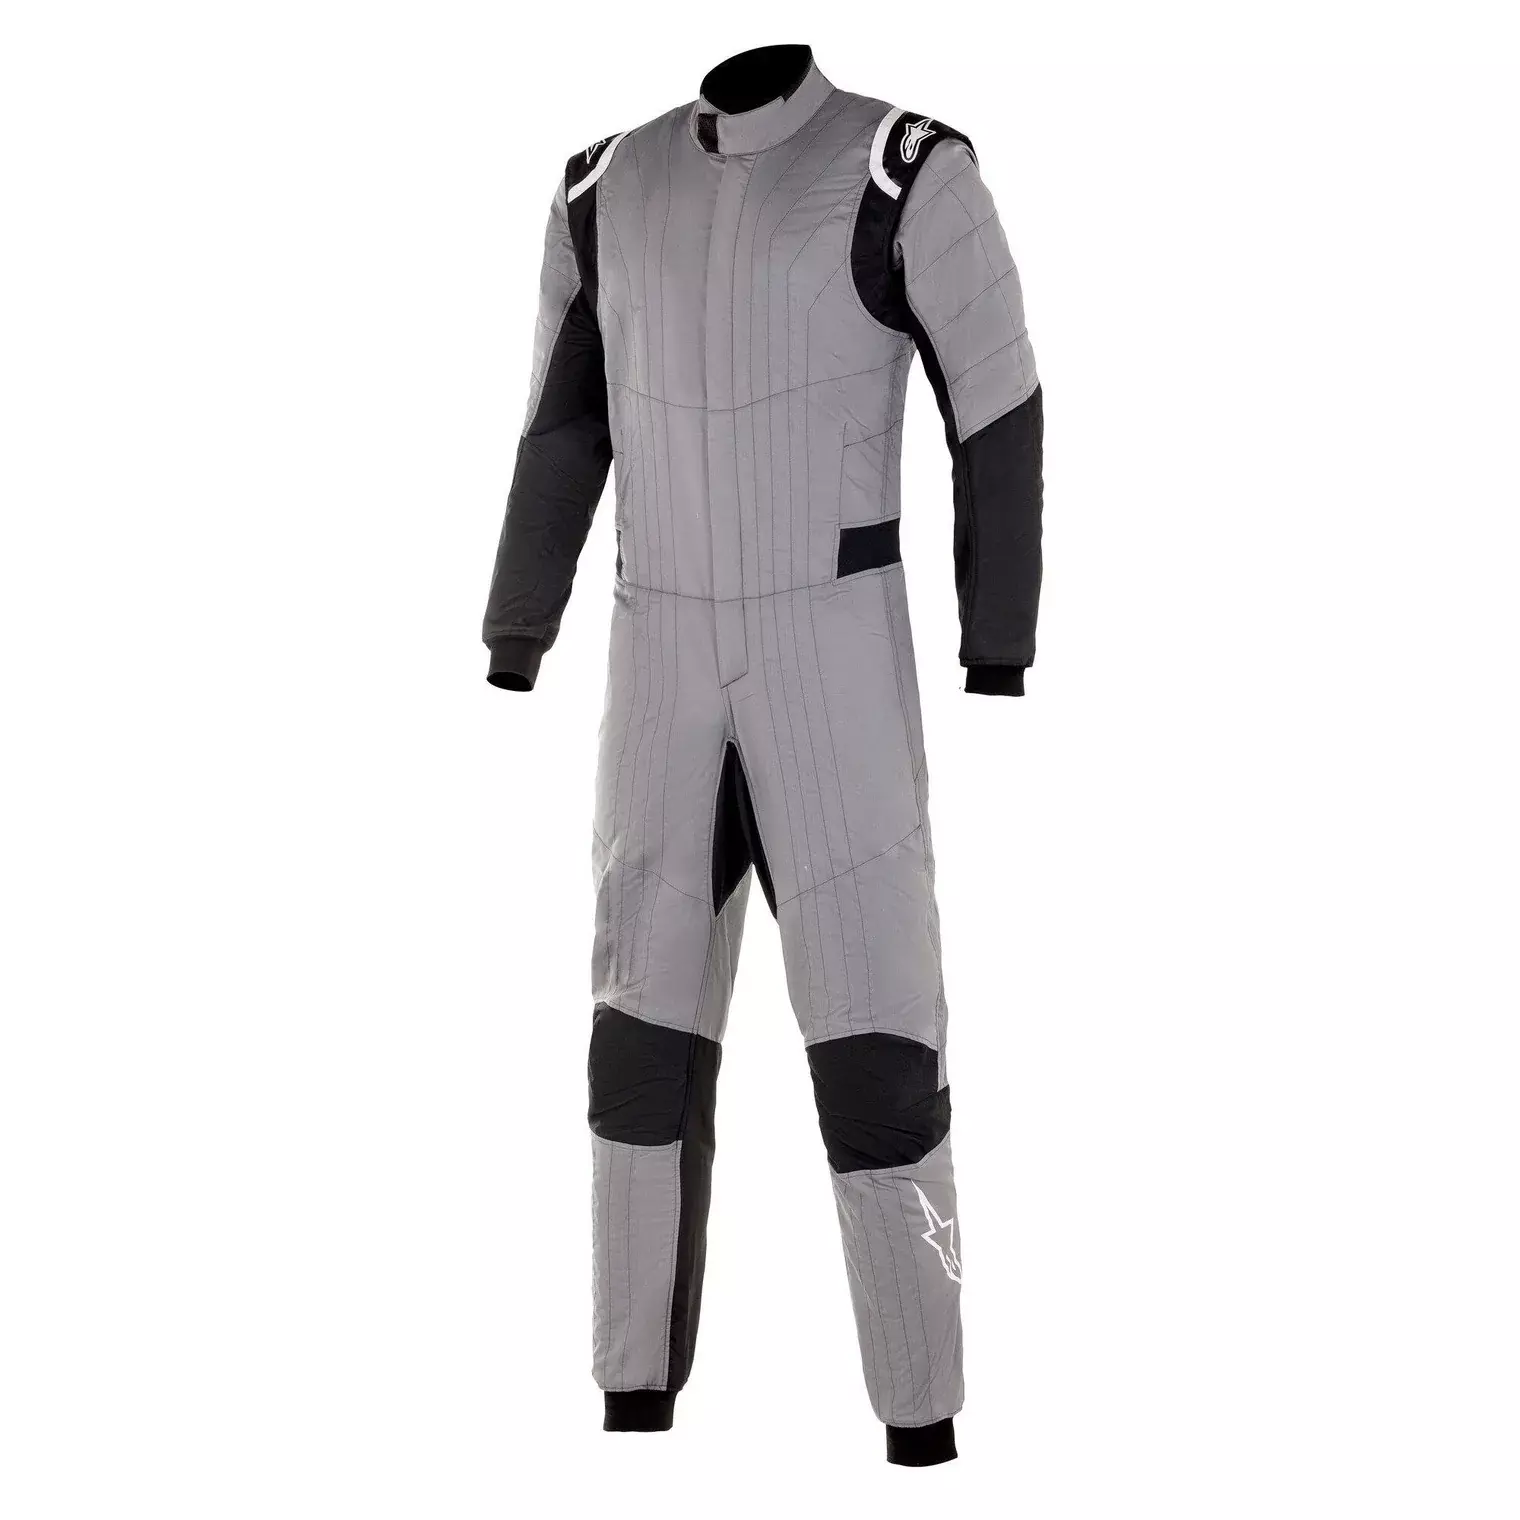 Alpinestars 3350220-971-58 Driving Suit, Hypertech V2, 1-Piece, FIA Approved, Double Layer, Fire Retardant Fabric, Gray / Black, Large / X-Large, Each